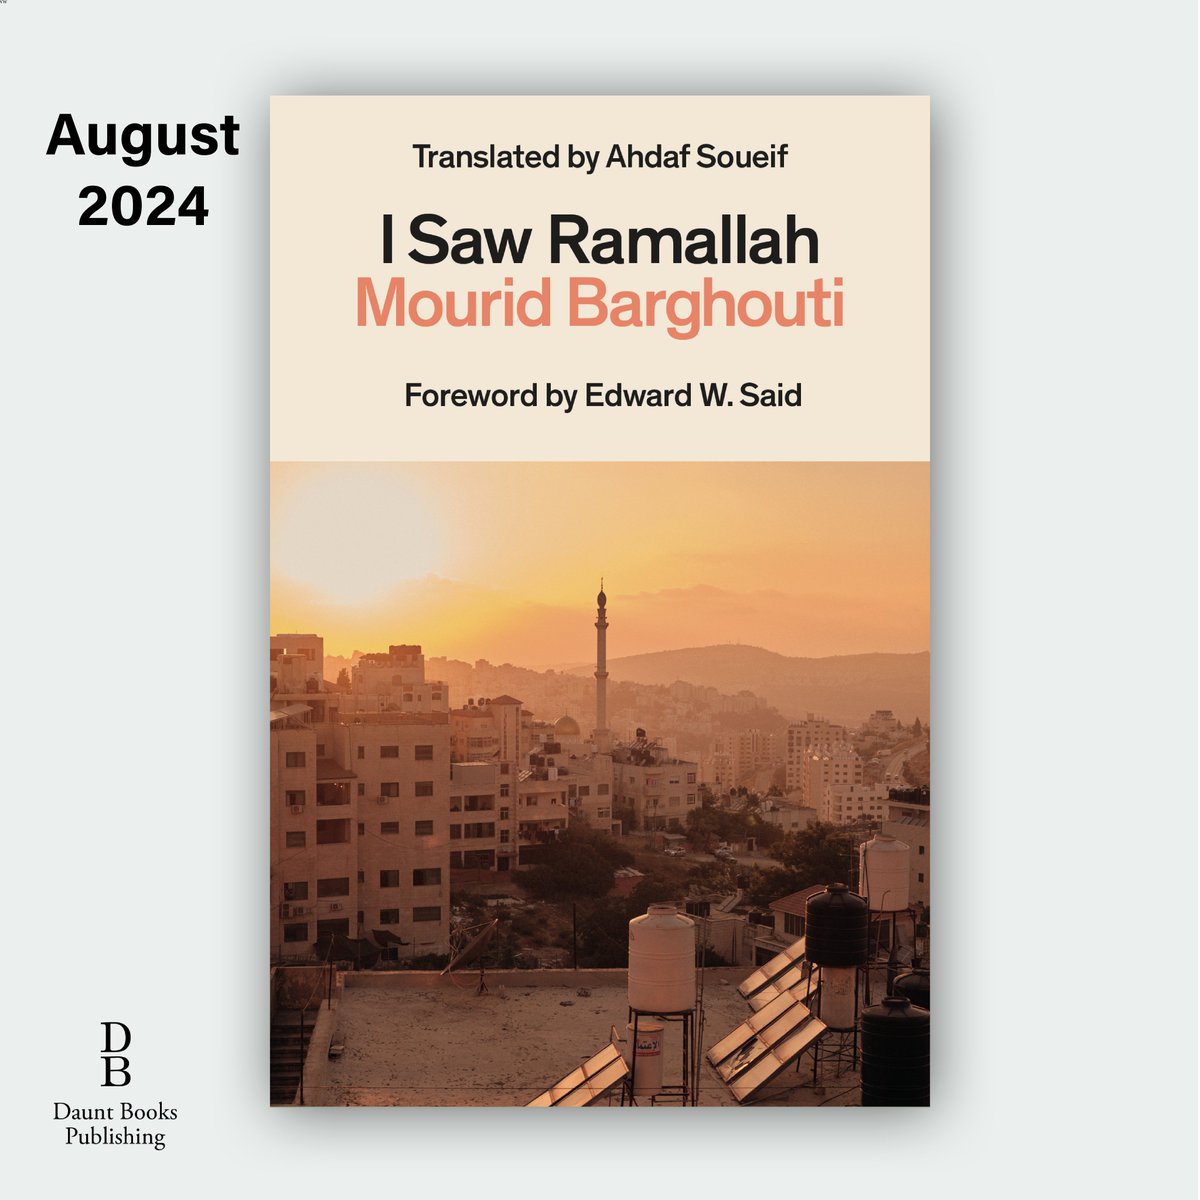 This August, we're proud to reissue Mourid Barghouti's beautiful memoir I SAW RAMALLAH 🇵🇸 (tr. Ahdaf Soueif, foreword by Edward Said), recounting the Palestinian poet's return to Ramallah after thirty years in exile